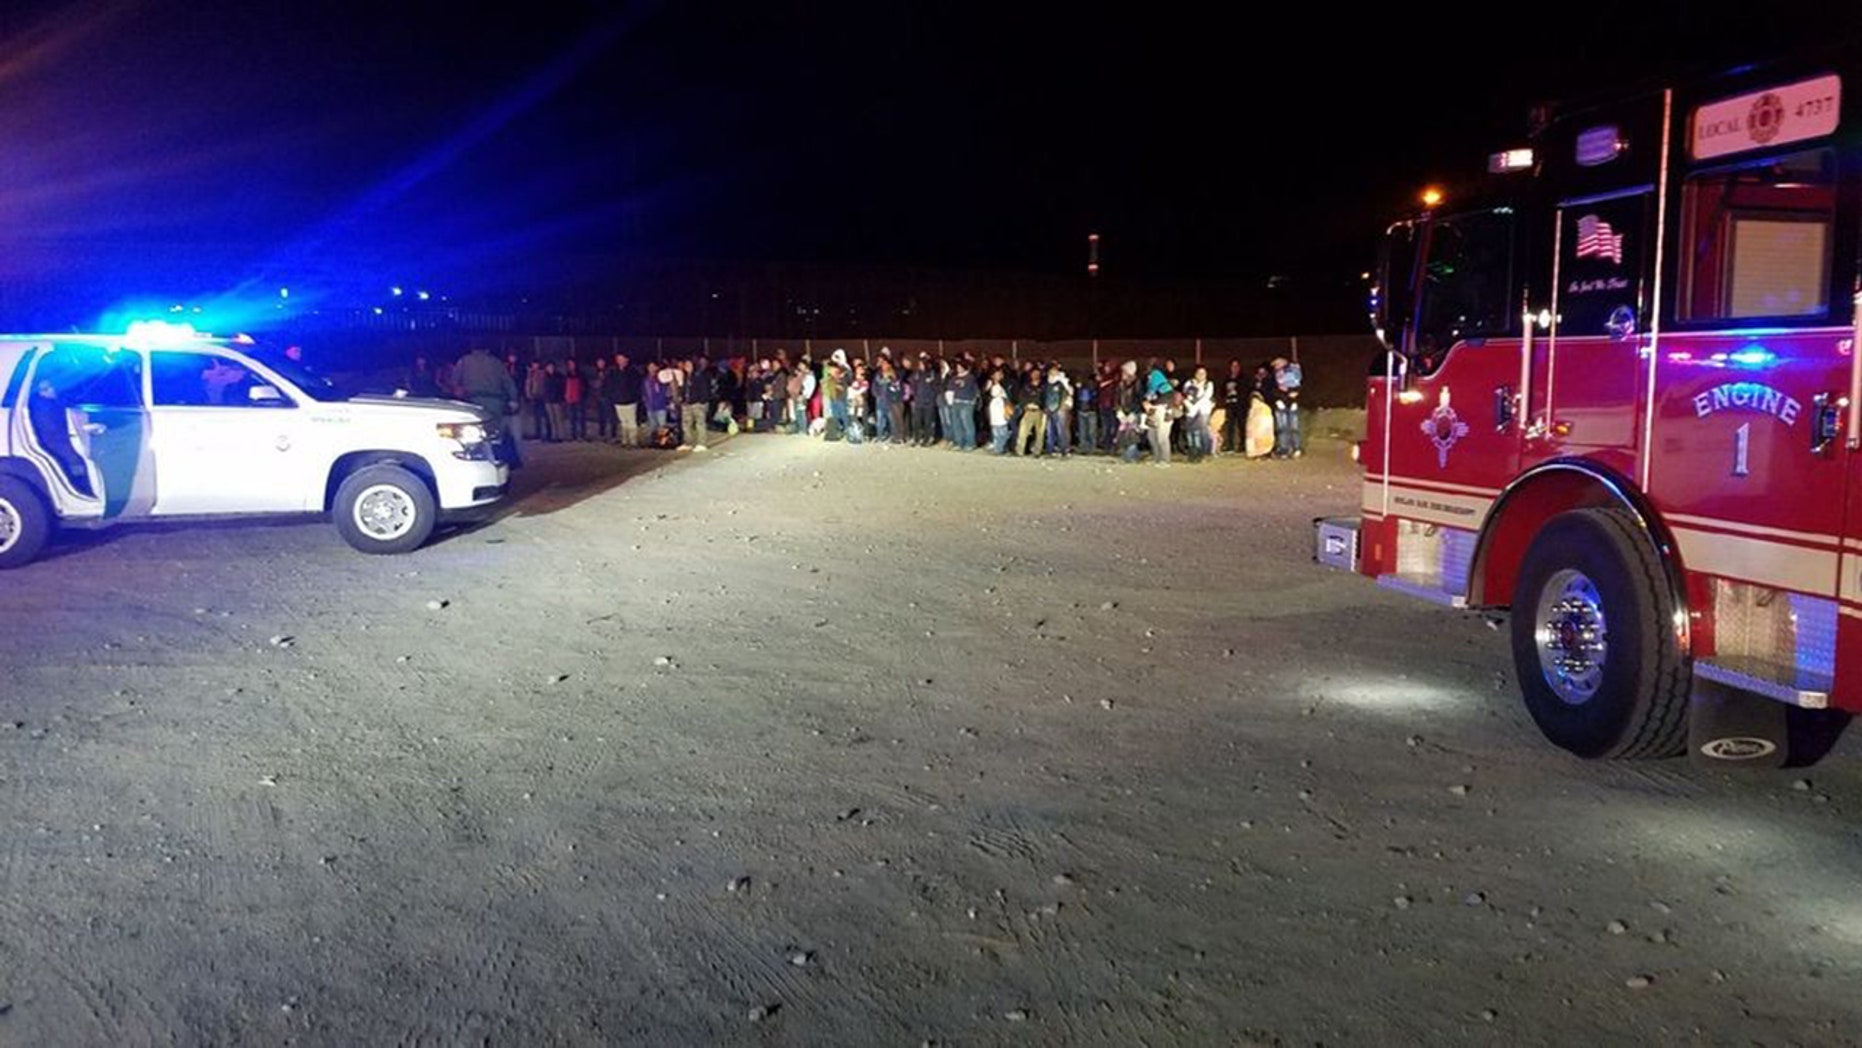 United States Customs and Border Protection officers in New Mexico arrested 180 illegal immigrants from the United States.